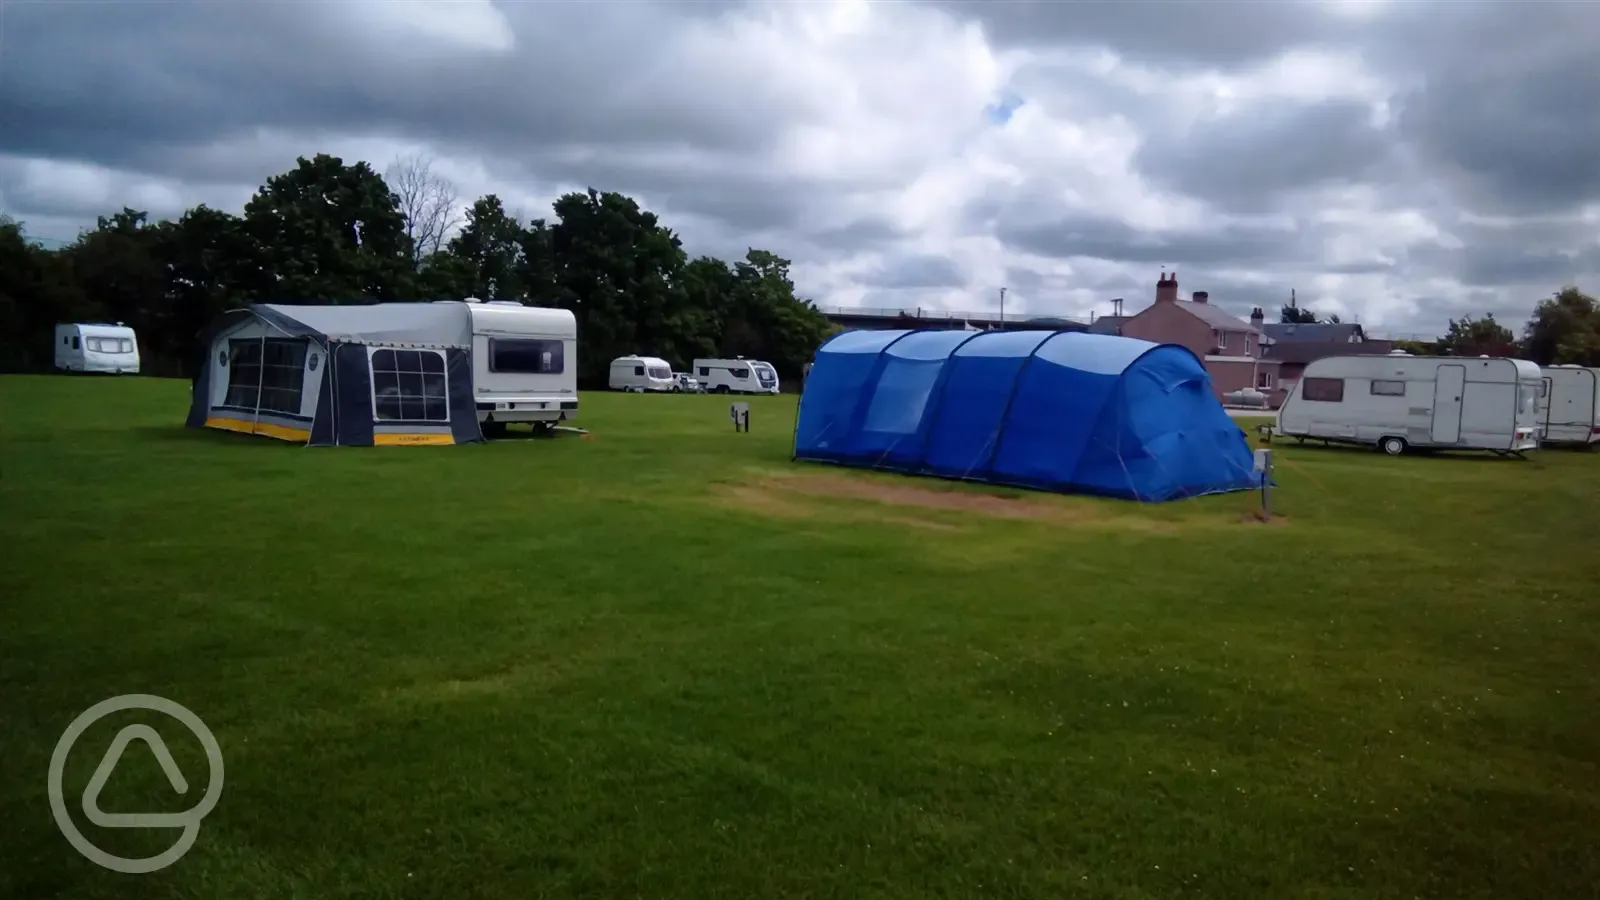 Tents and Caravans on the site